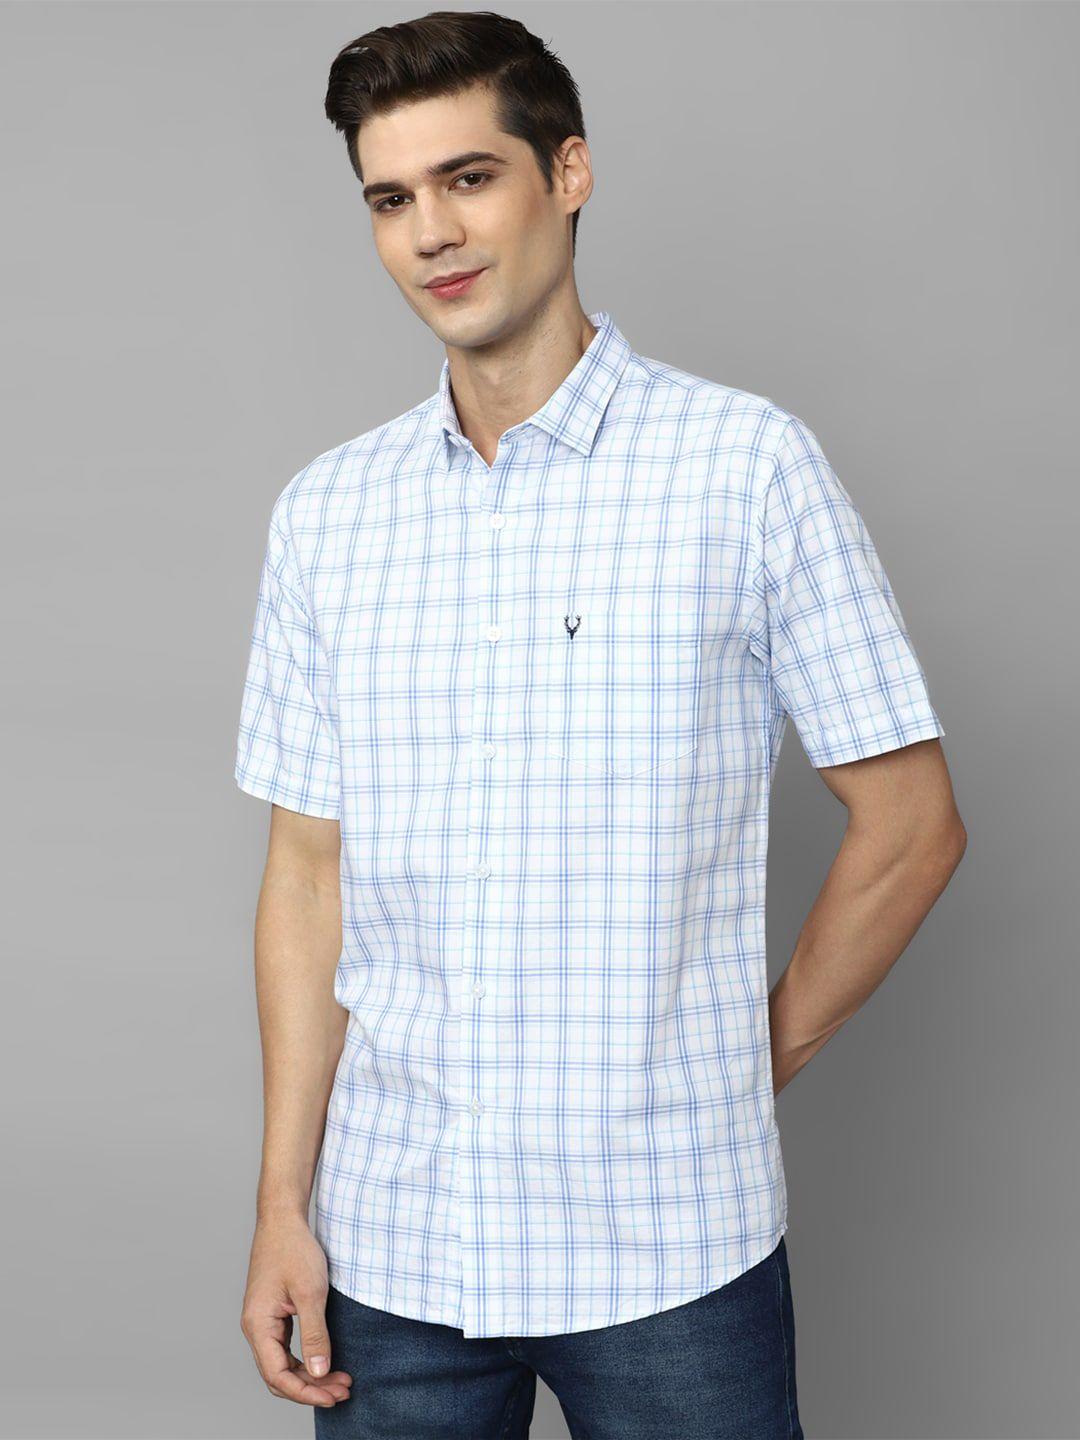 allen solly slim fit checked pure cotton casual shirt